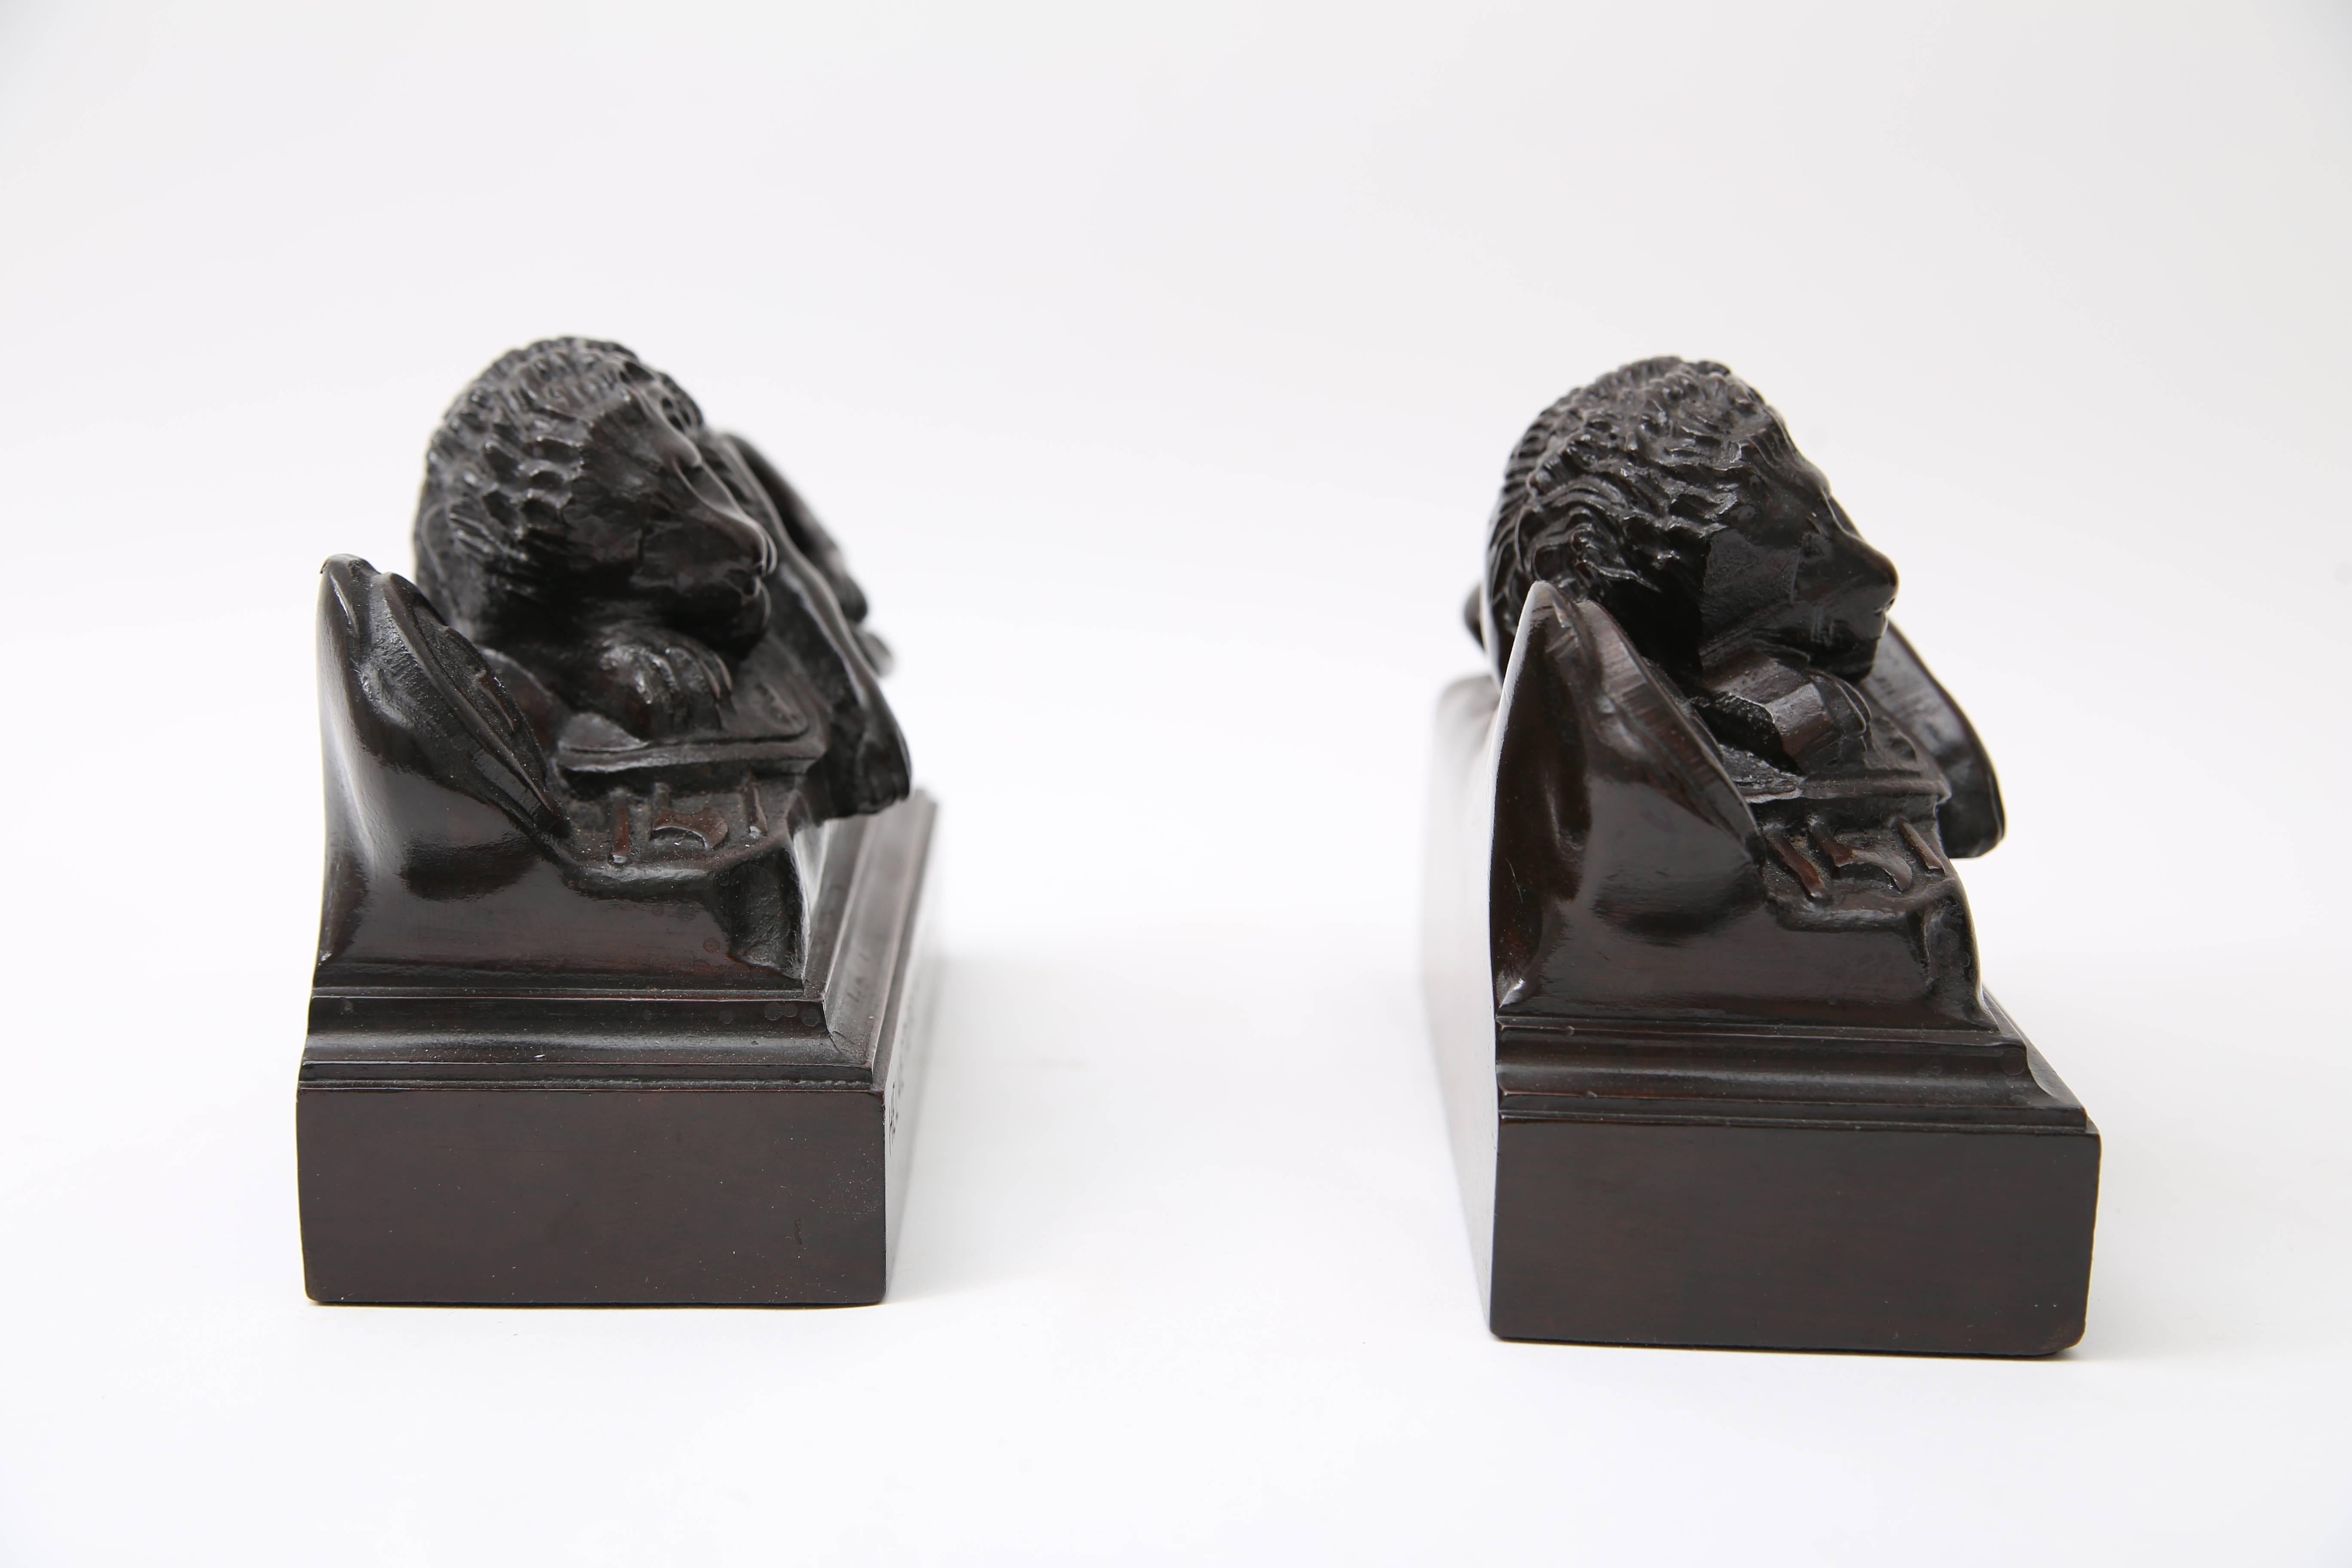 French Pair of Carved Wood Book Ends Depicting the Swiss Guard Lions of Lucerne, France